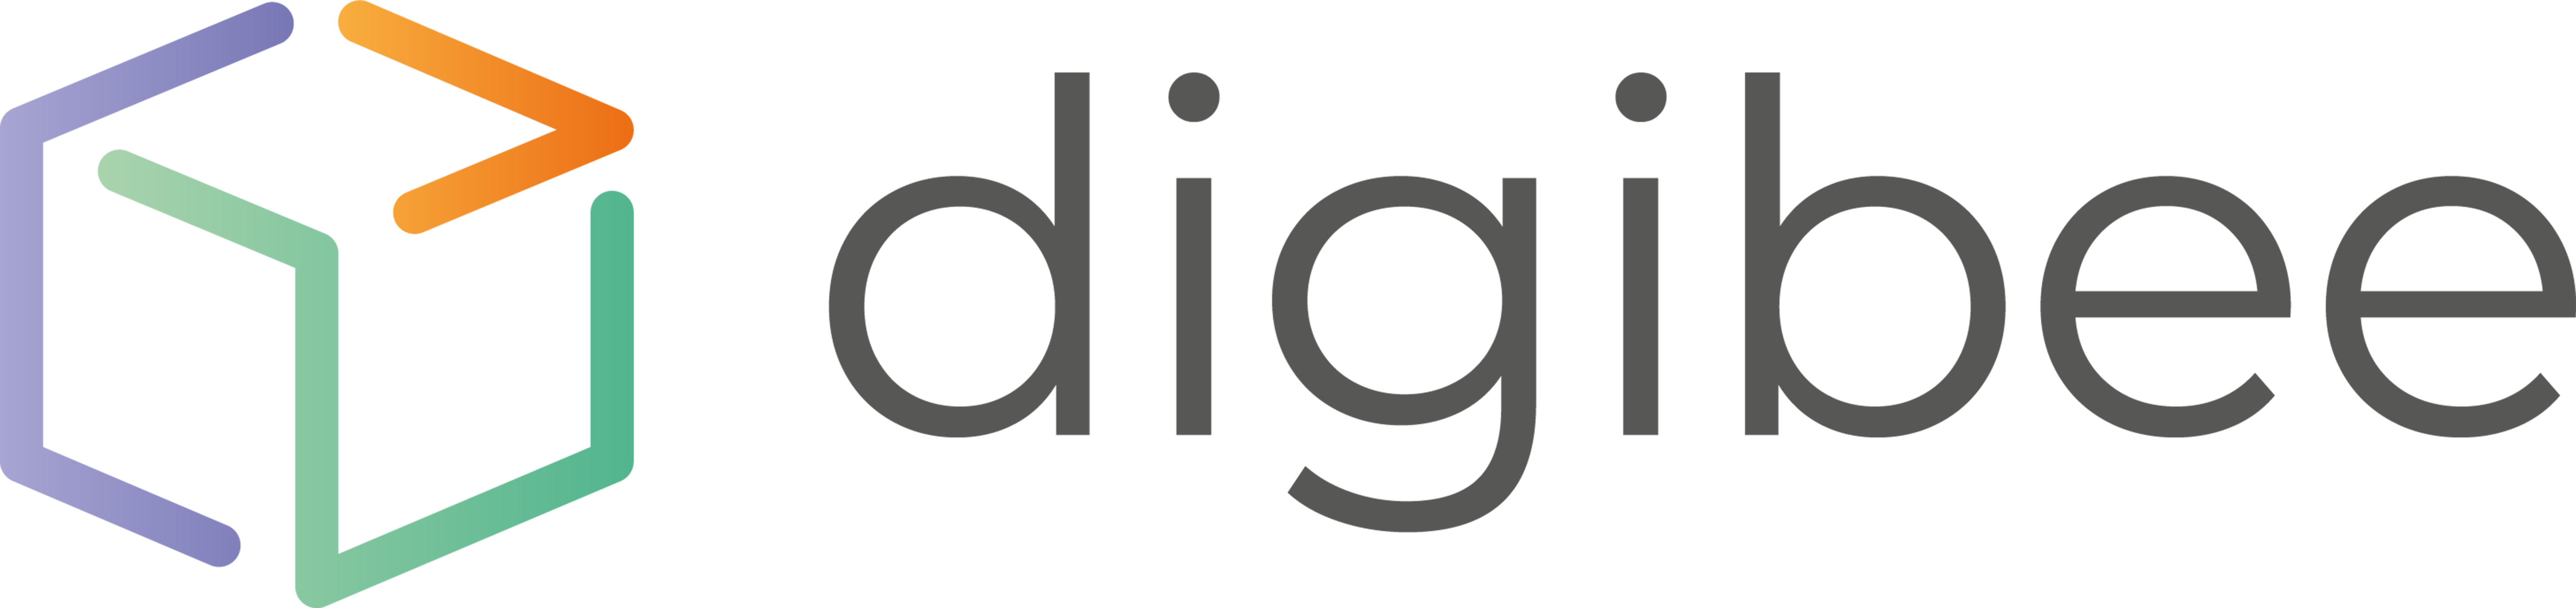 logo_Digibee.png